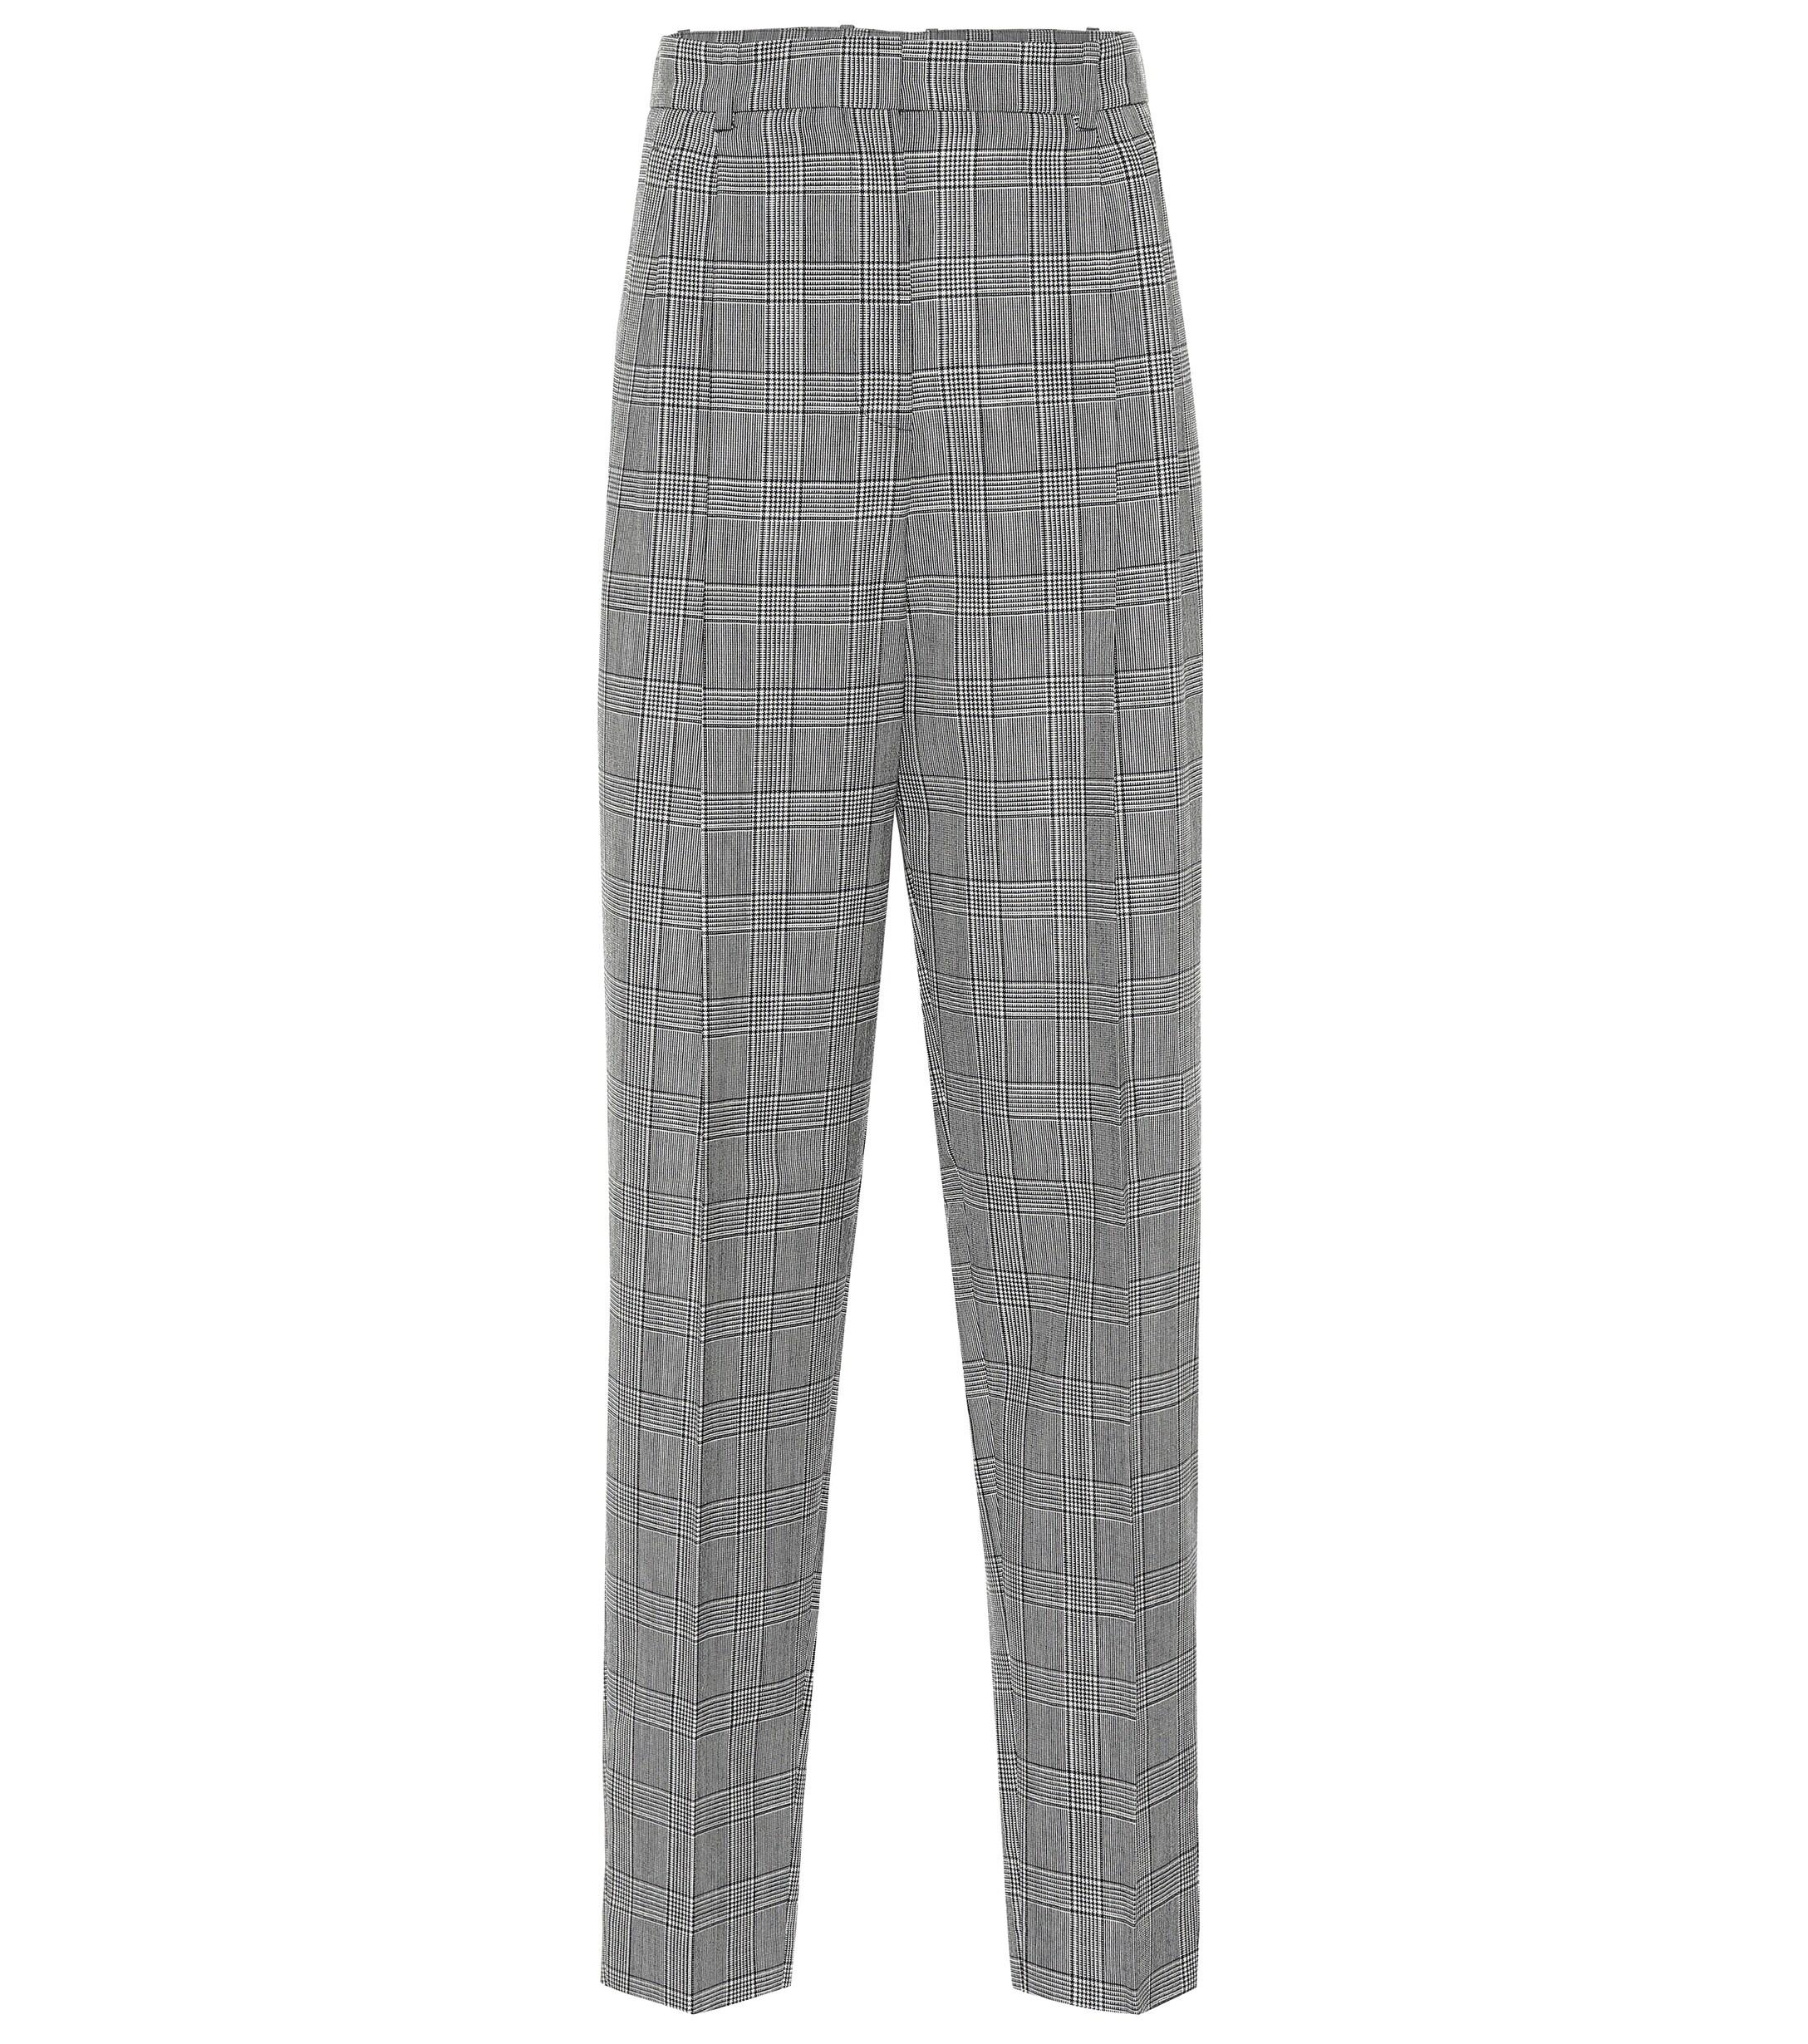 Givenchy Plaid High-rise Straight Wool Pants in Black - Lyst